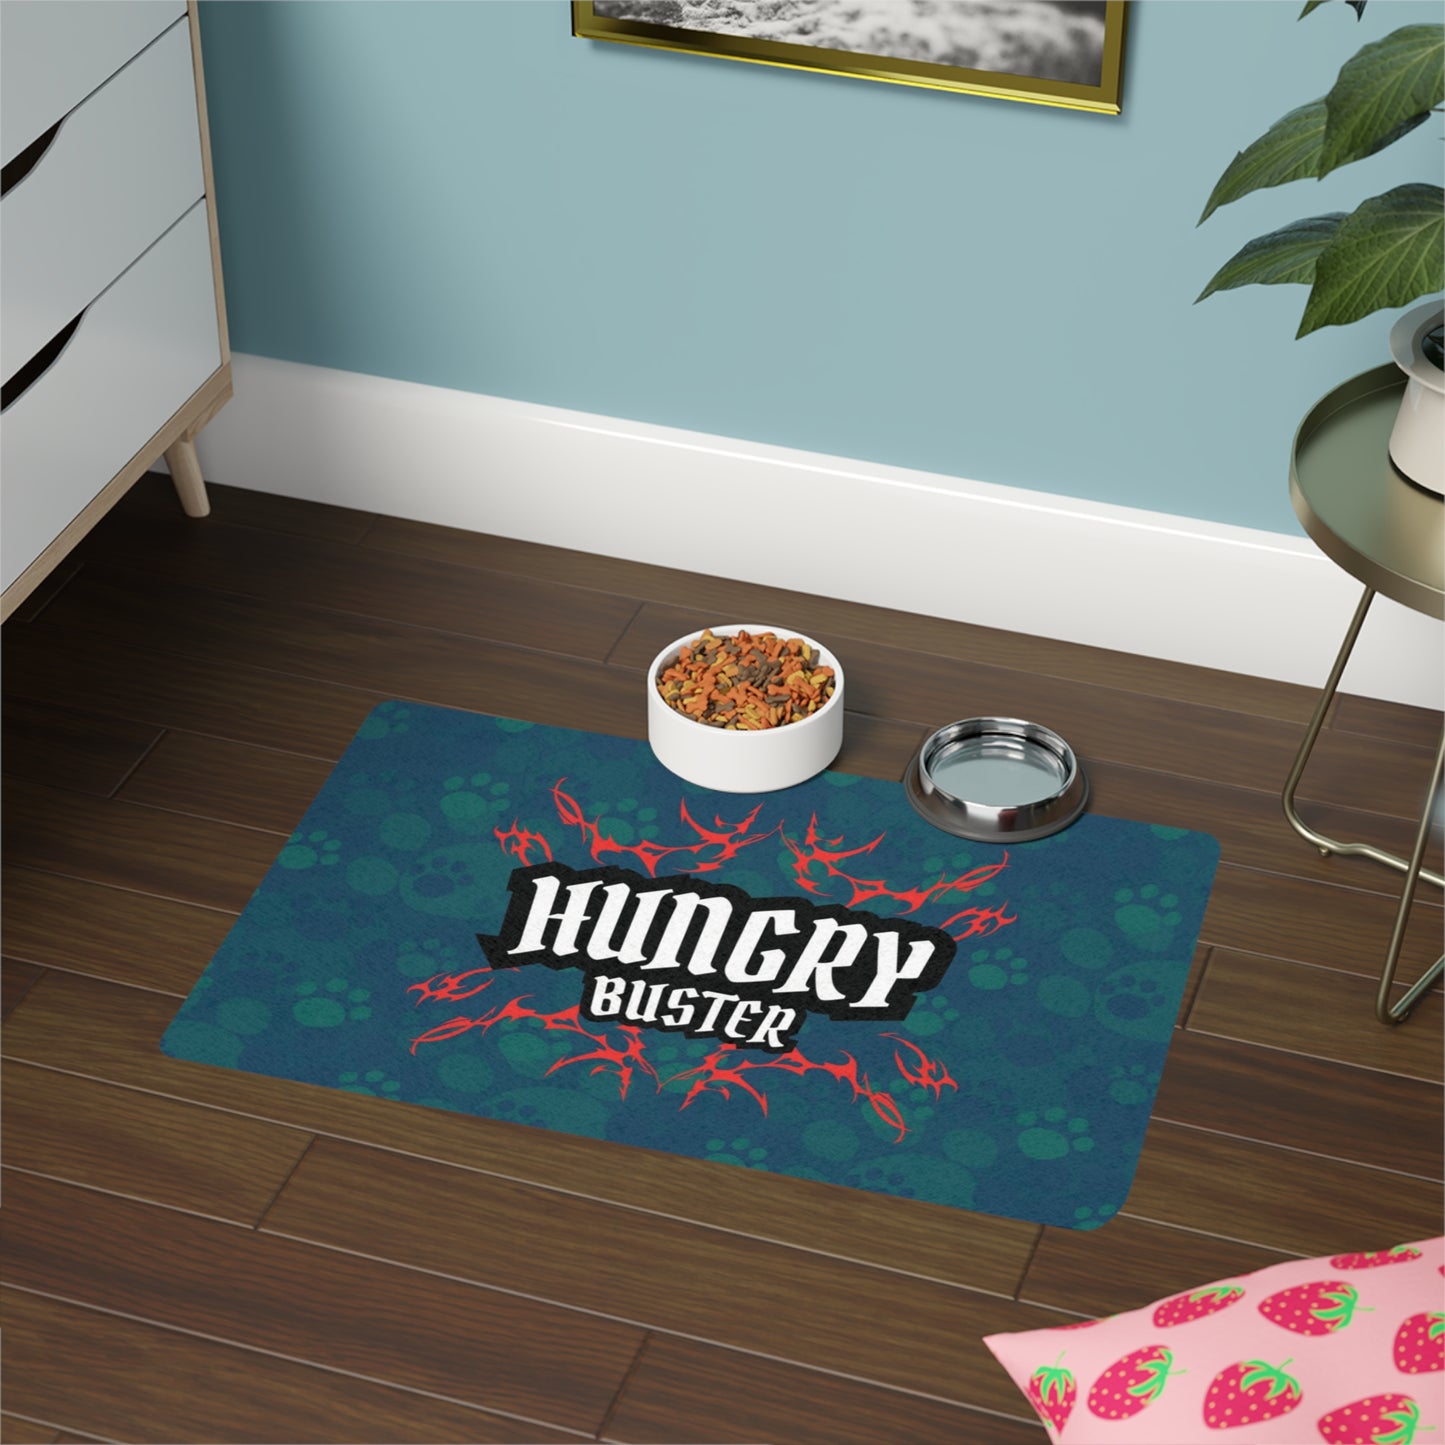 Personalized Pet Bowl Mat - Hungry Sea Green